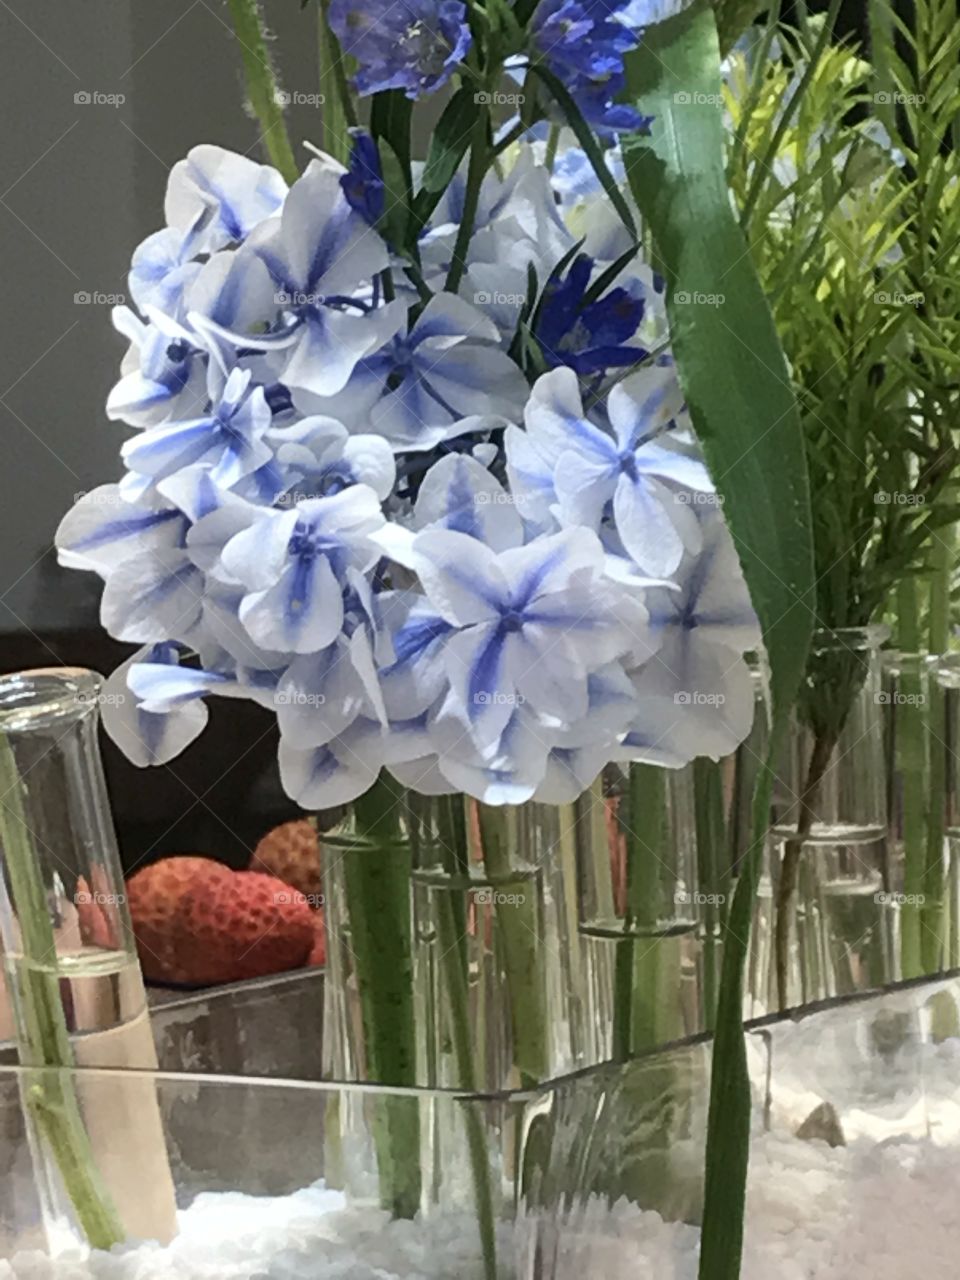 The center piece. Beautiful, elegant flowers on display as a table center piece. 